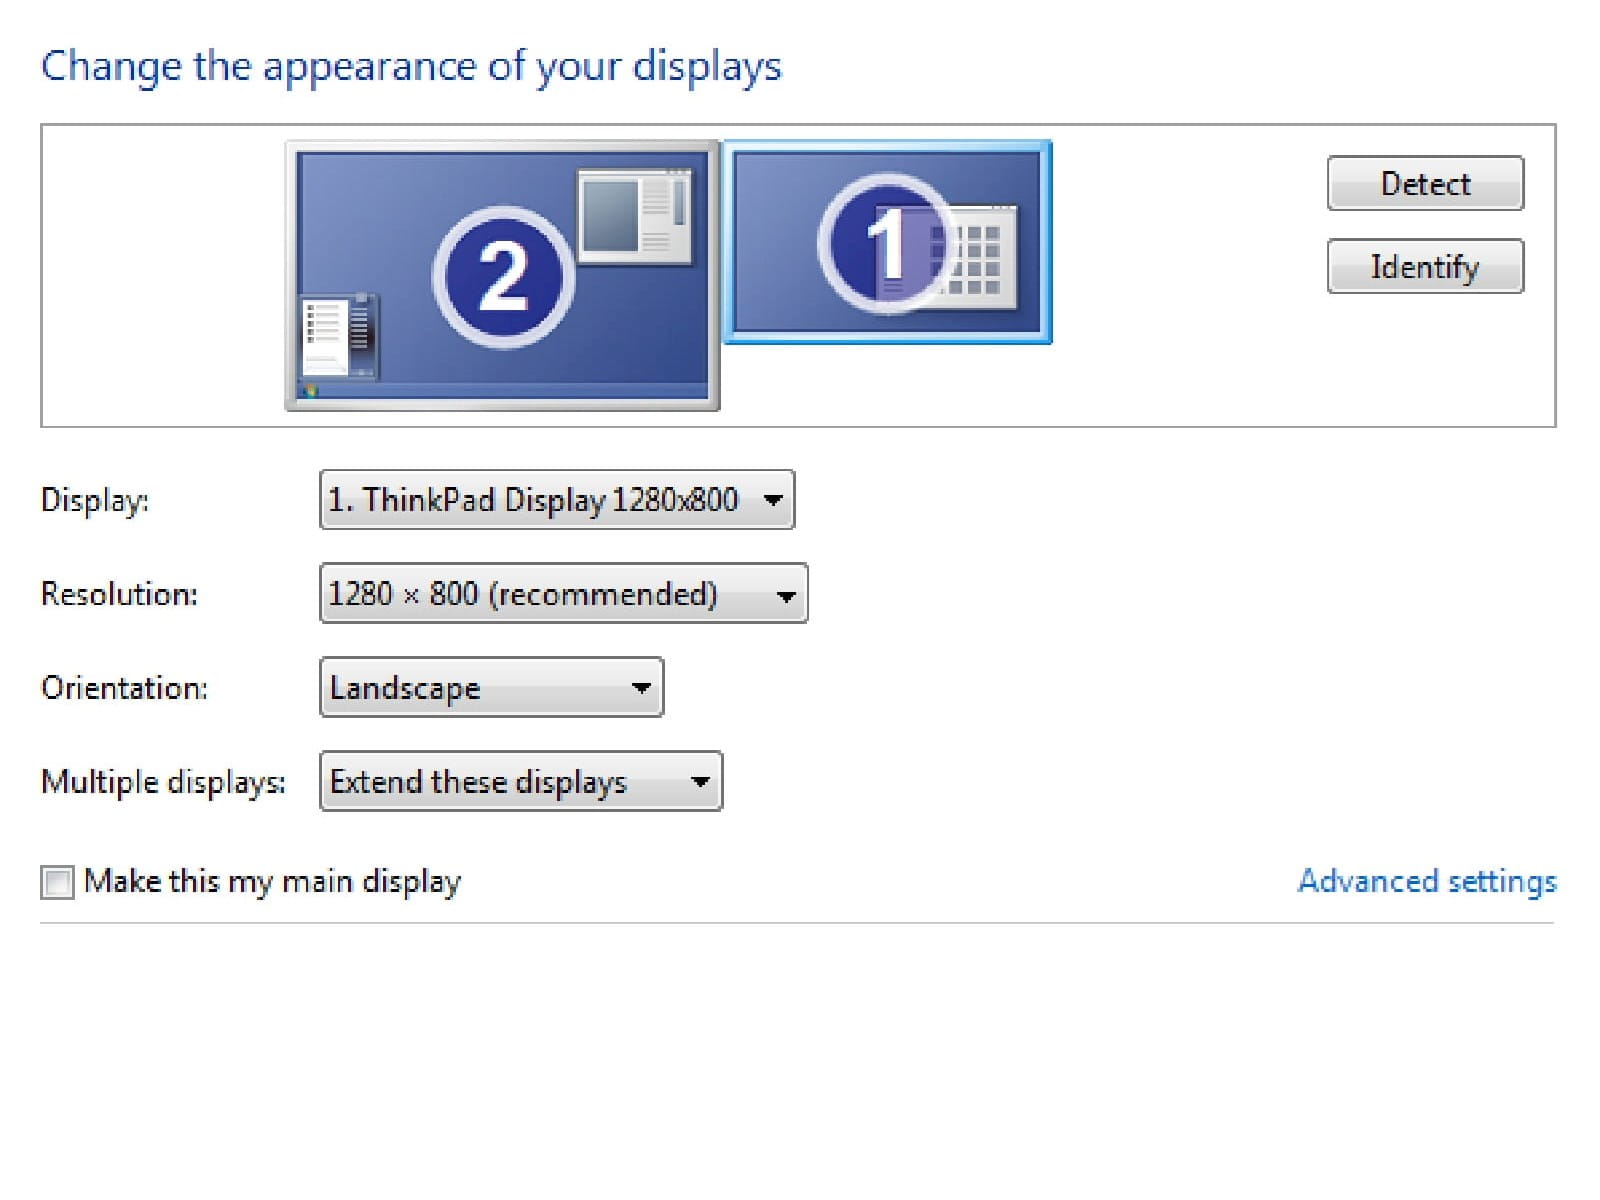 Change the appearance of your displays